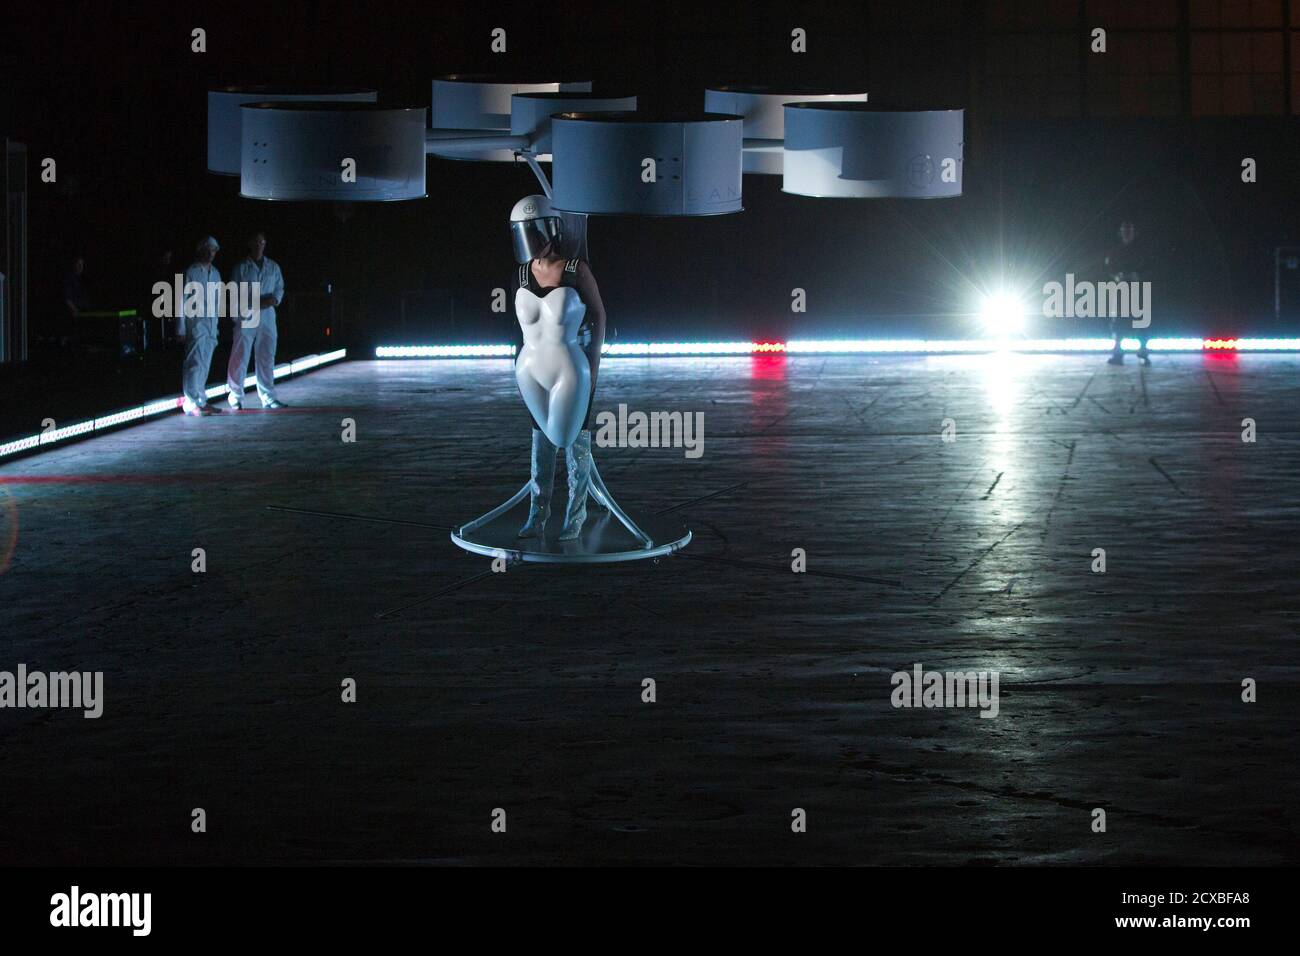 Lady Gaga flies with the Volantis, a flying dress, at the 